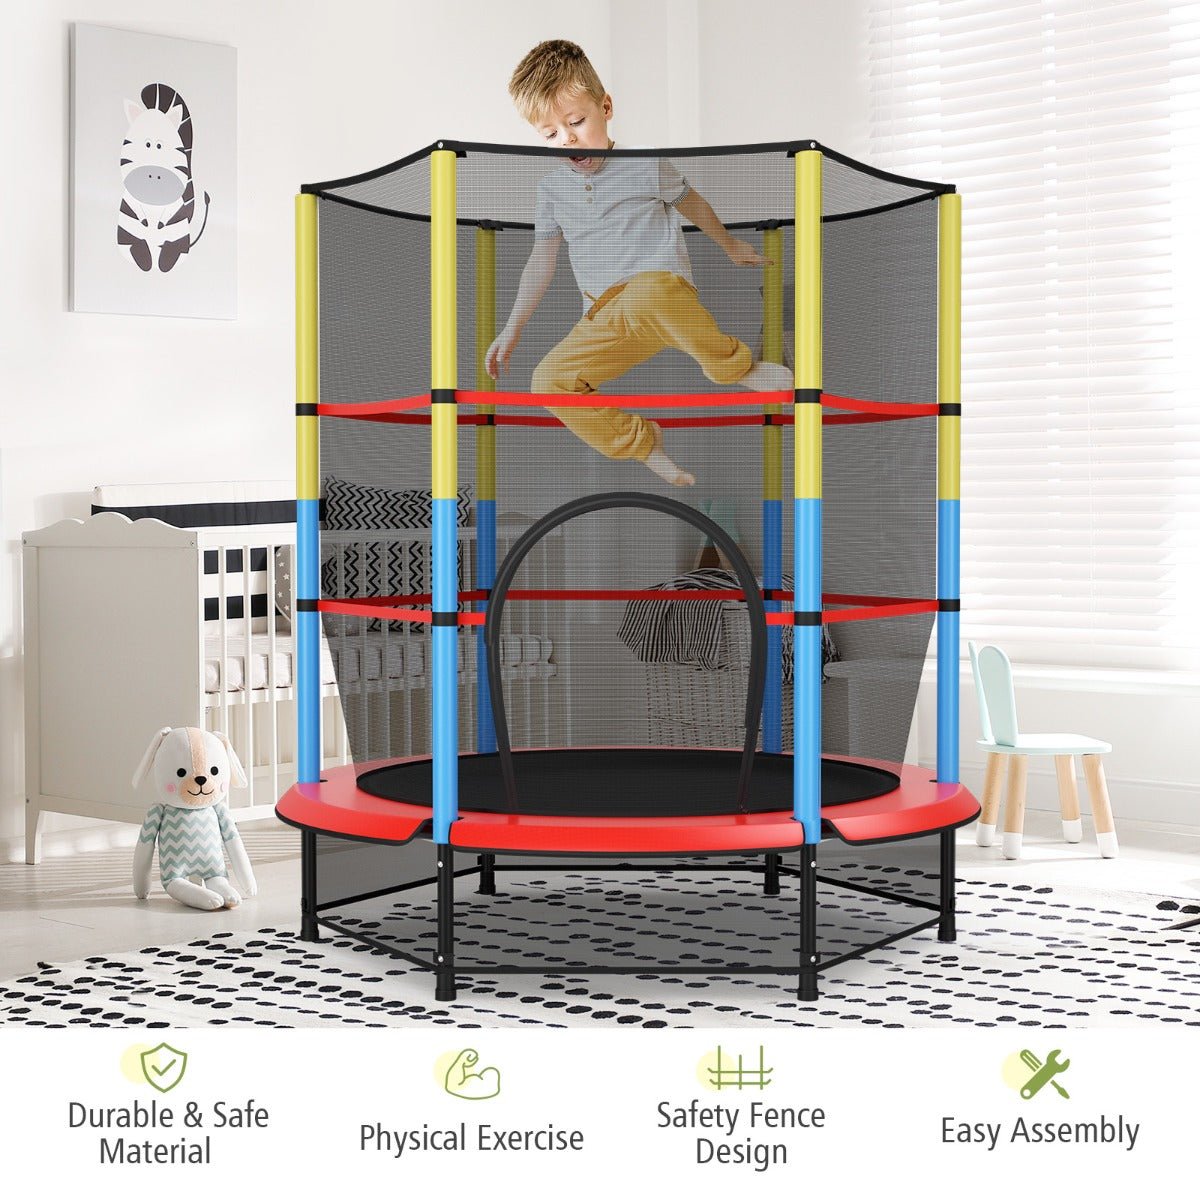 Safe Bouncing: 55 Inches Kids Trampoline with Enclosure Net